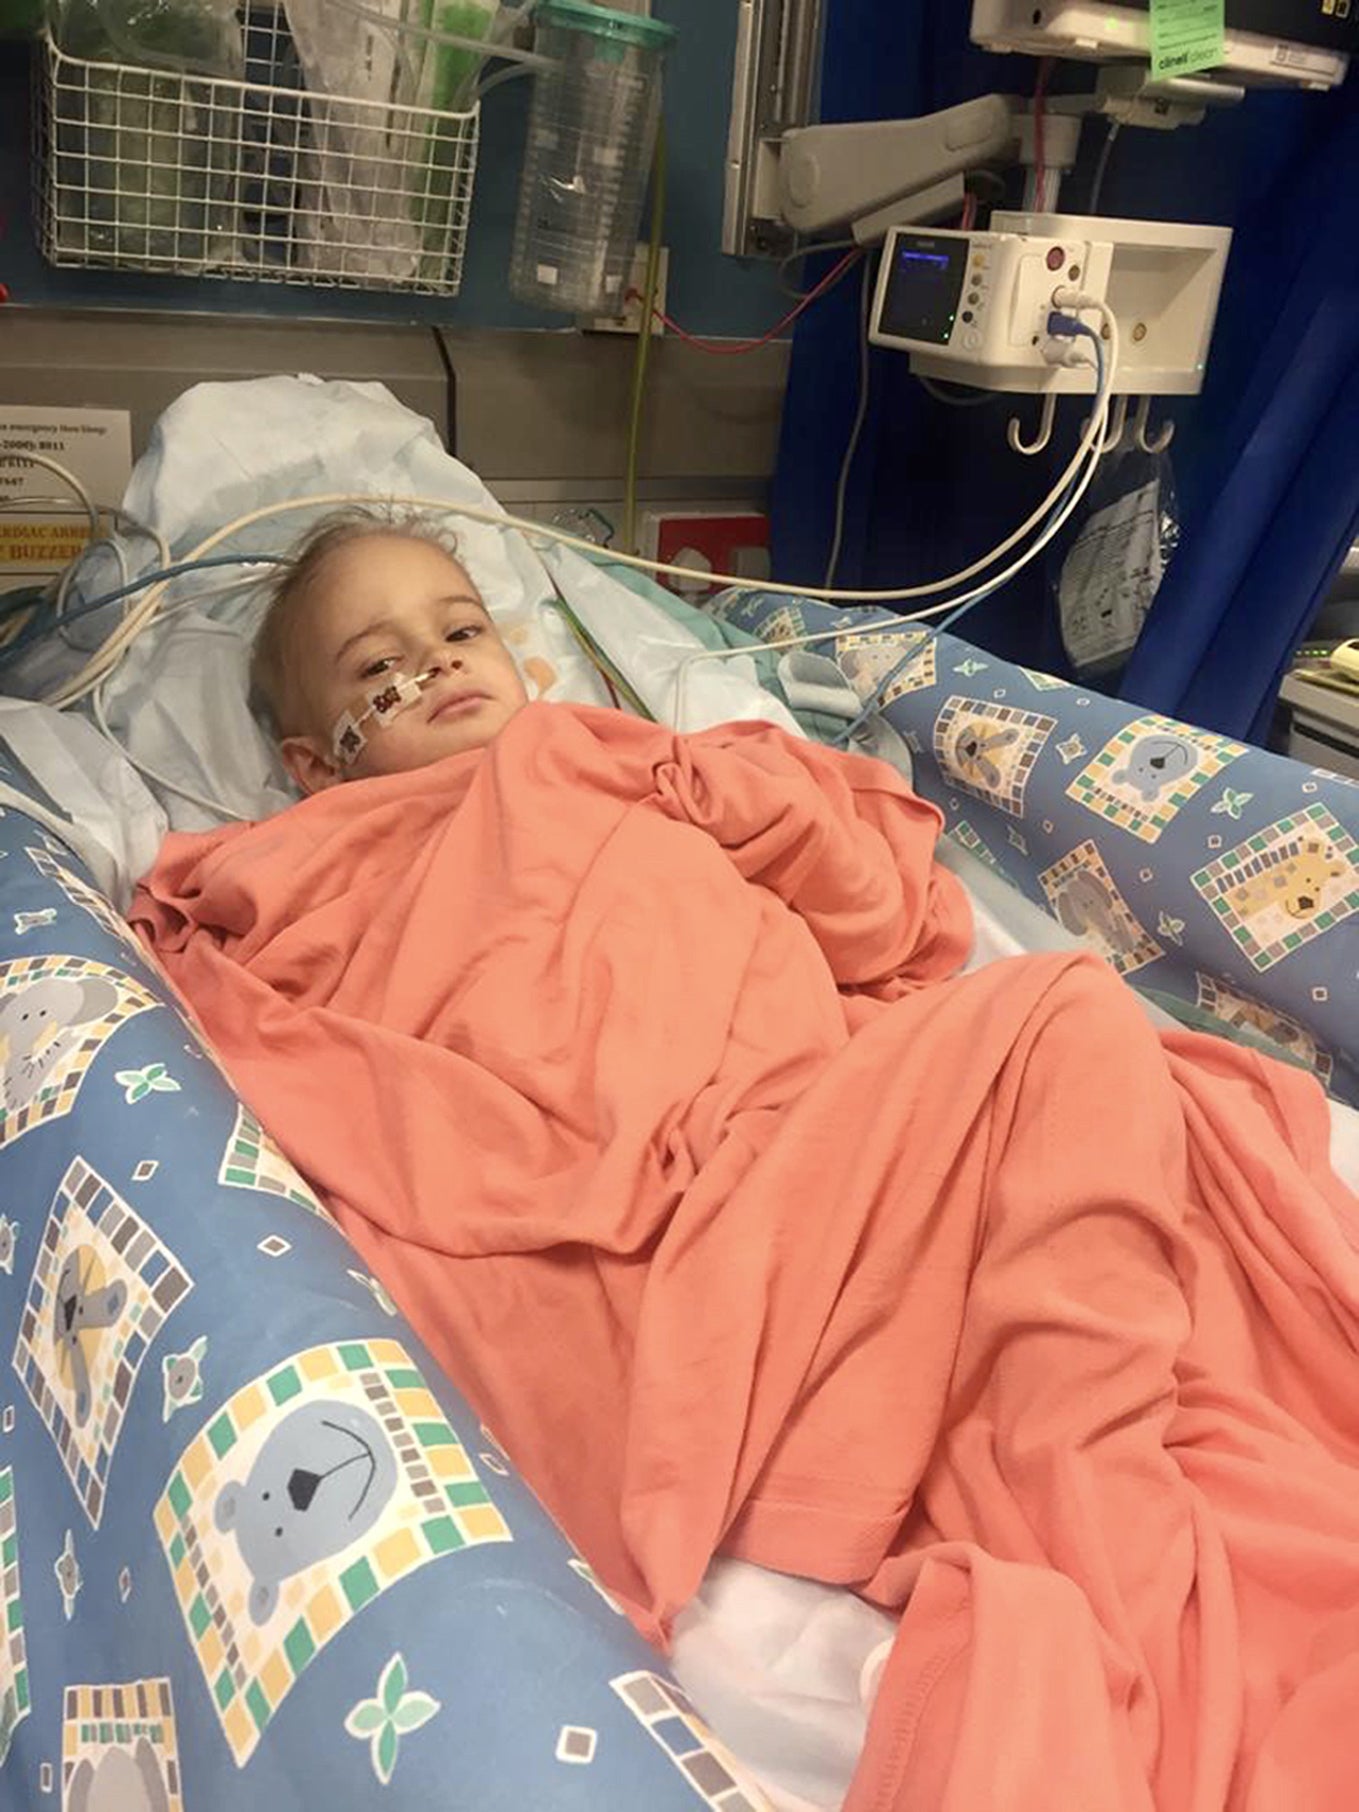 Liam spent a year having painful cancer treatment for neuroblastoma, but his family feared that without the vaccine the cancer could return with potentially deadly consequences